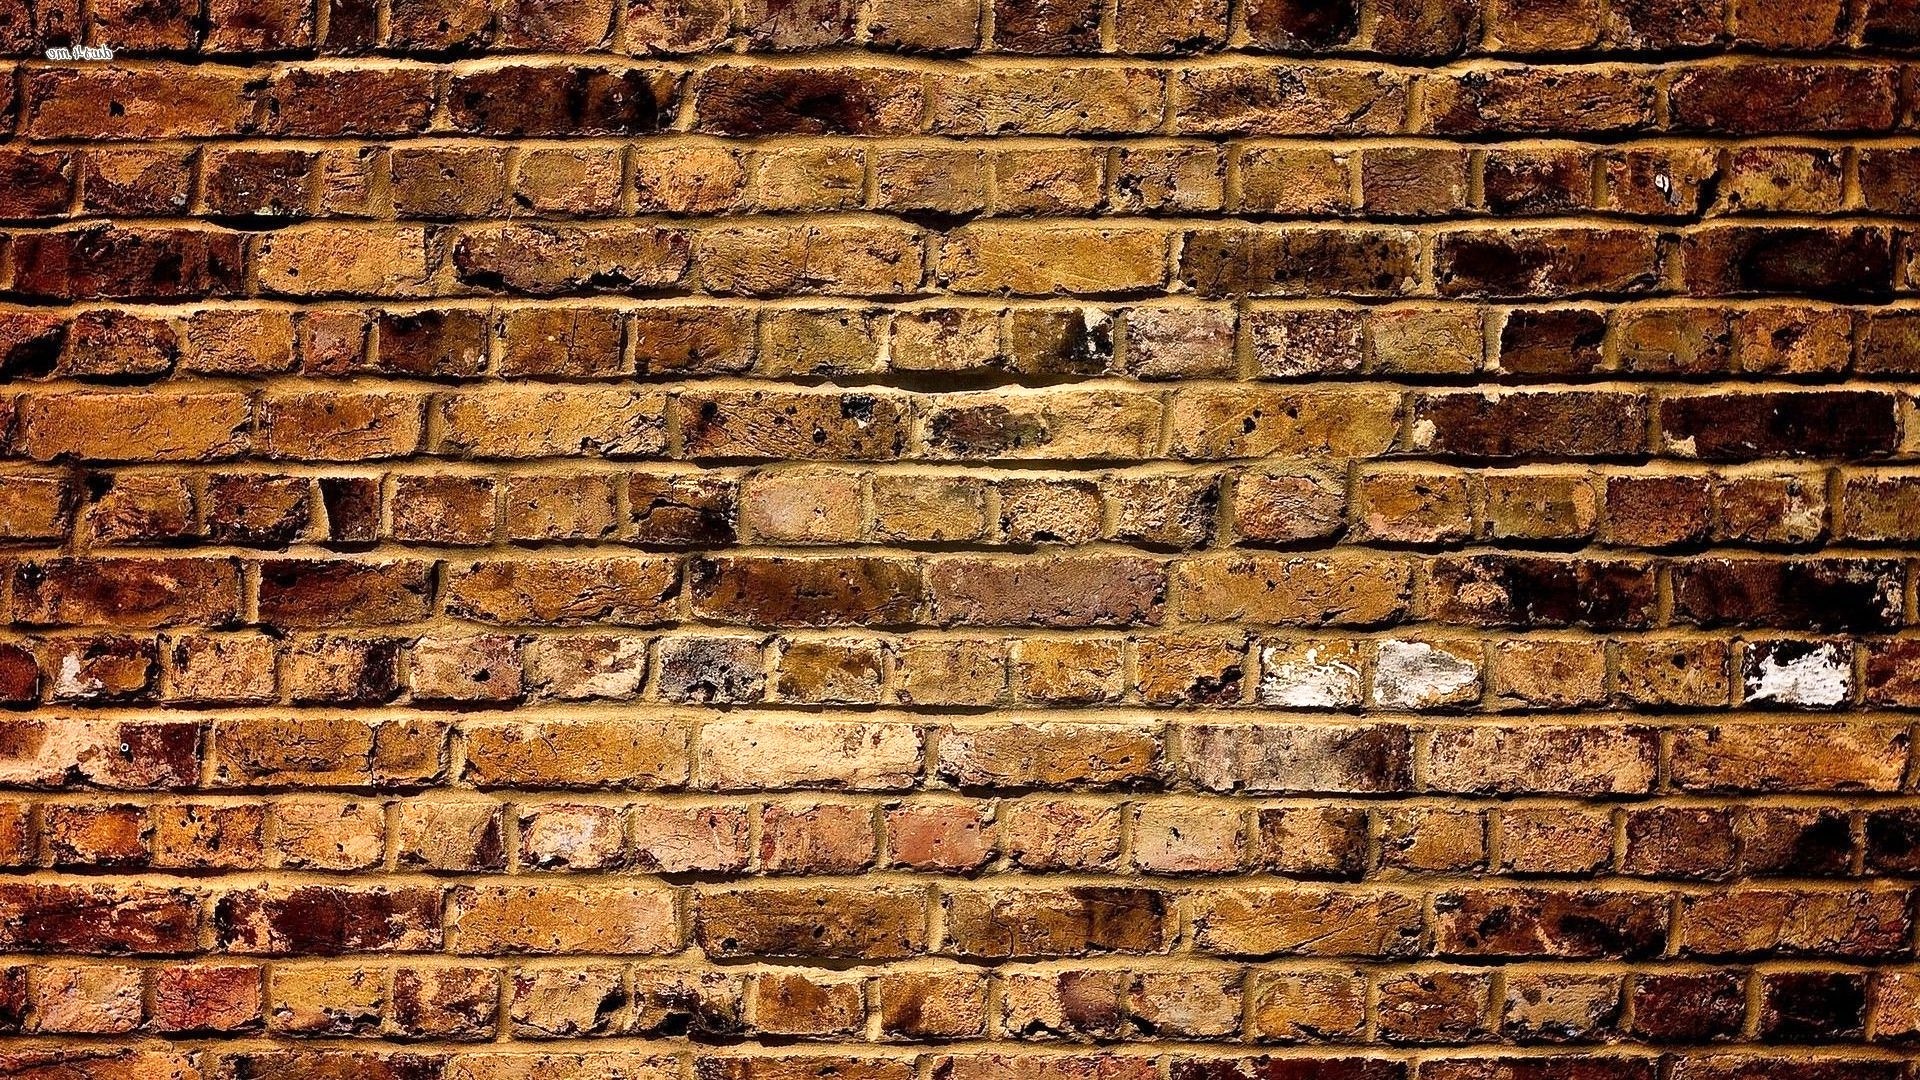 Brick Macbook Backgrounds with high-resolution 1920x1080 pixel. You can use and set as wallpaper for Notebook Screensavers, Mac Wallpapers, Mobile Home Screen, iPhone or Android Phones Lock Screen